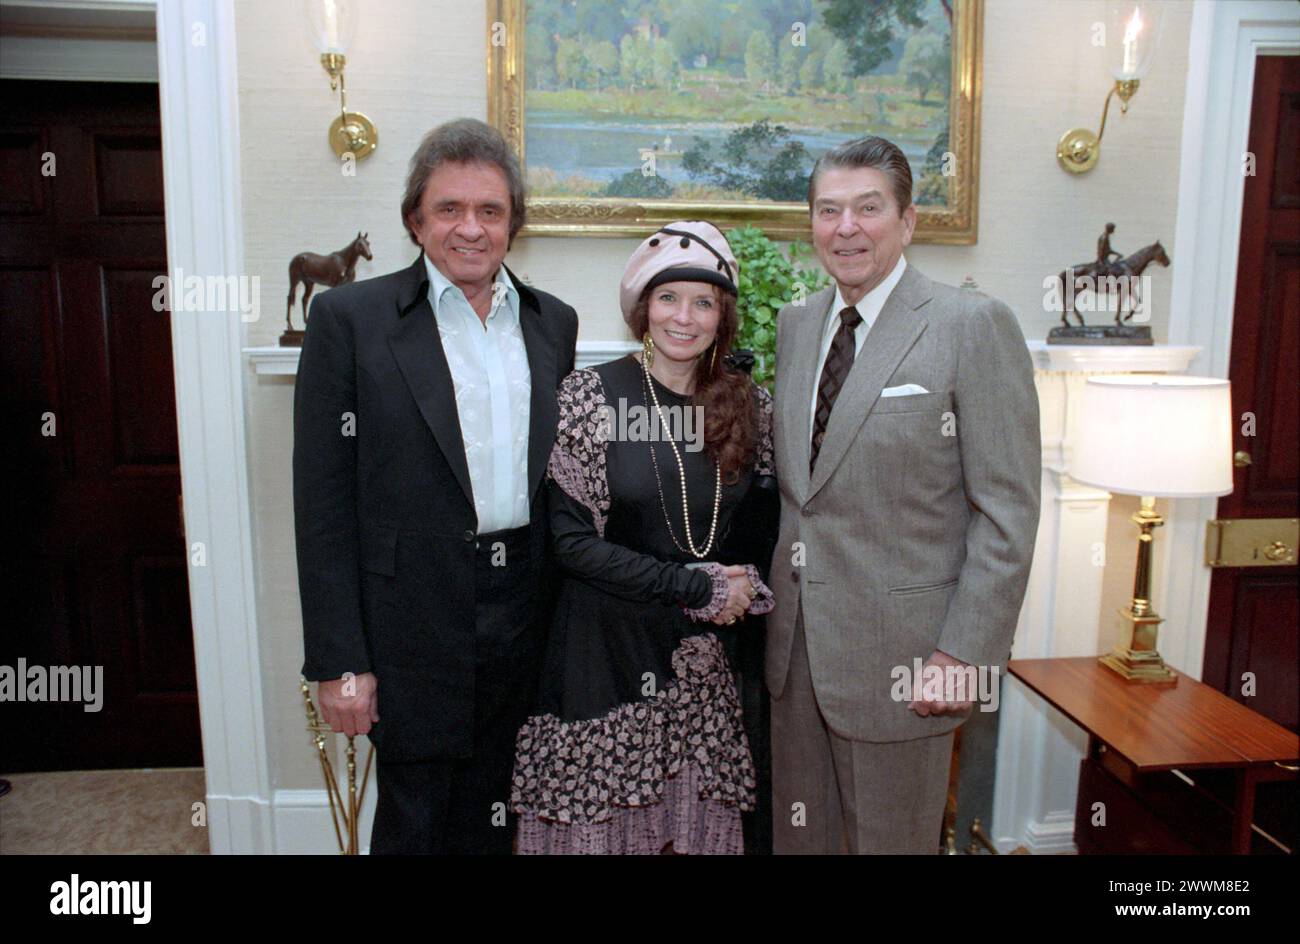 President Ronald Reagan with Johnny Cash and June Carter Cash in The Oval Office Study, 1988 - White House Office Photo Stock Photo